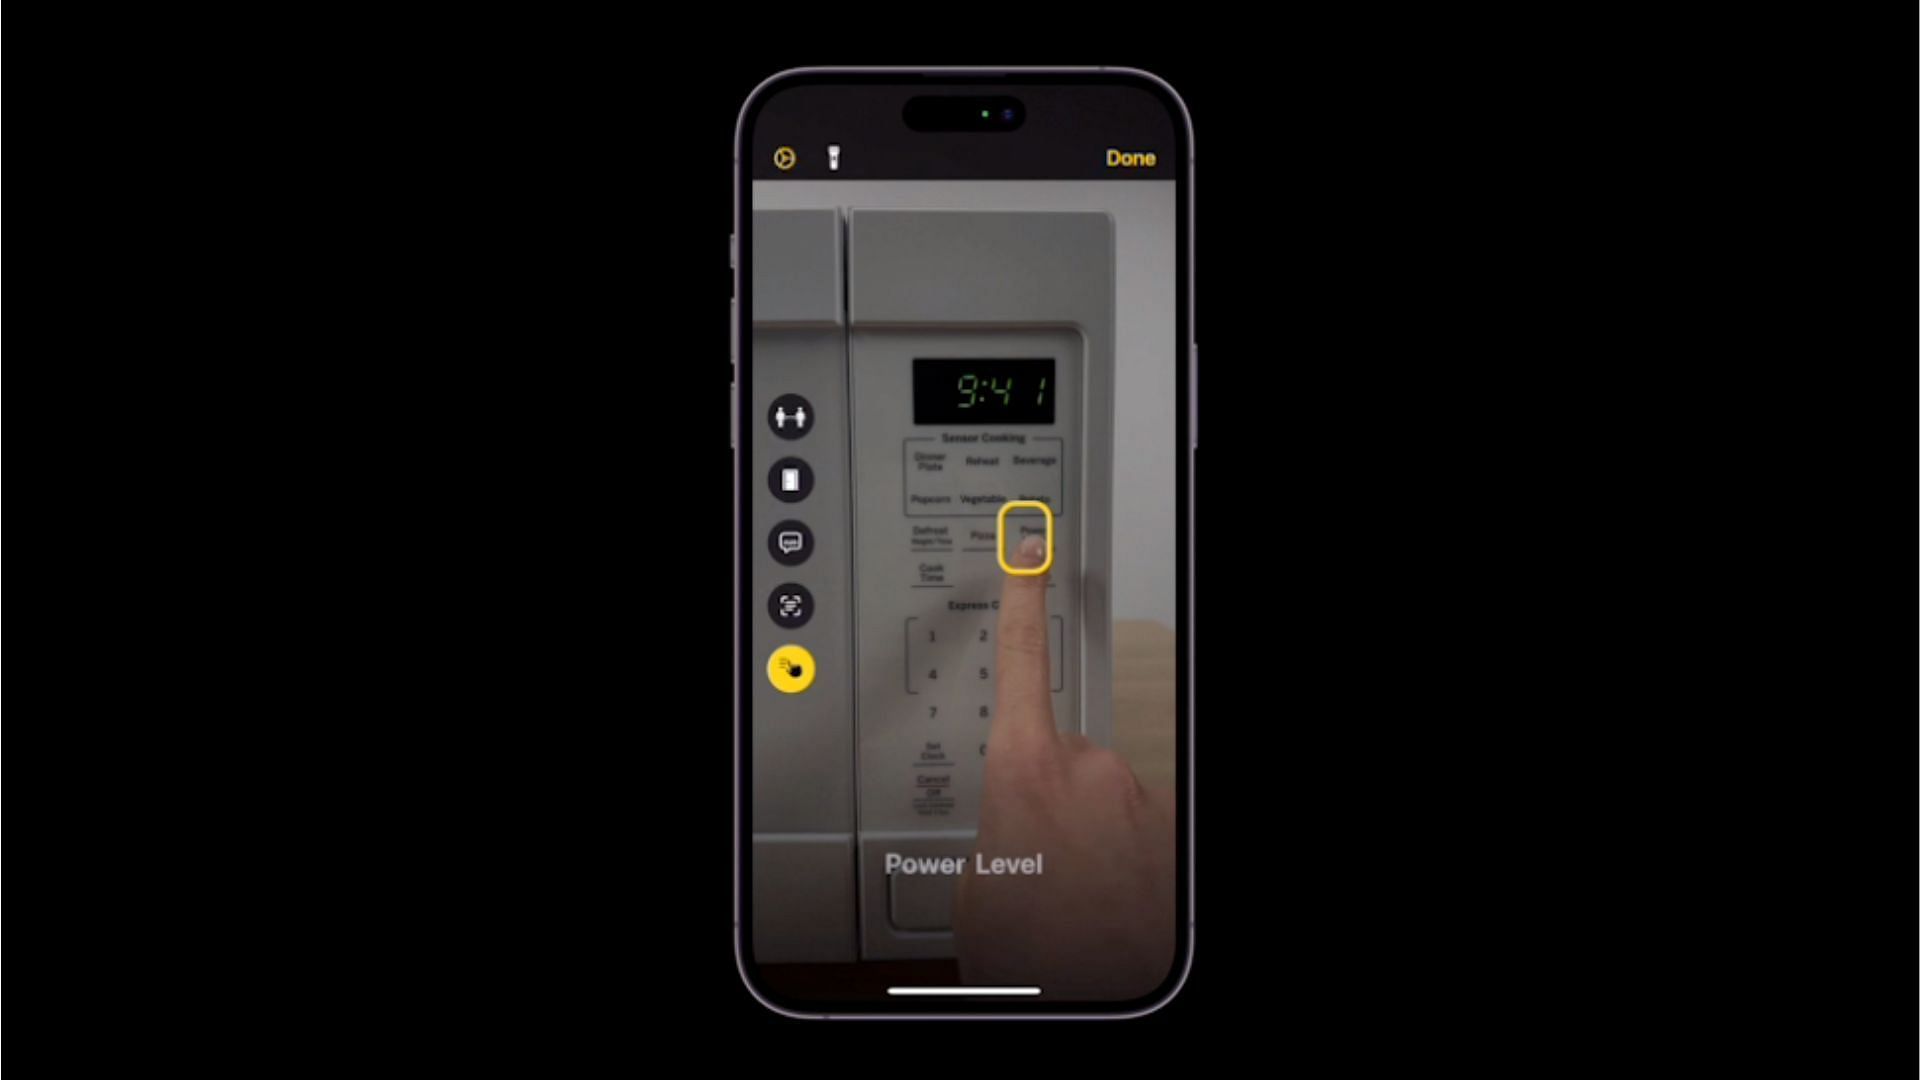 Point and Speak helps the visually impaired to use appliances and more. (Image via Apple)